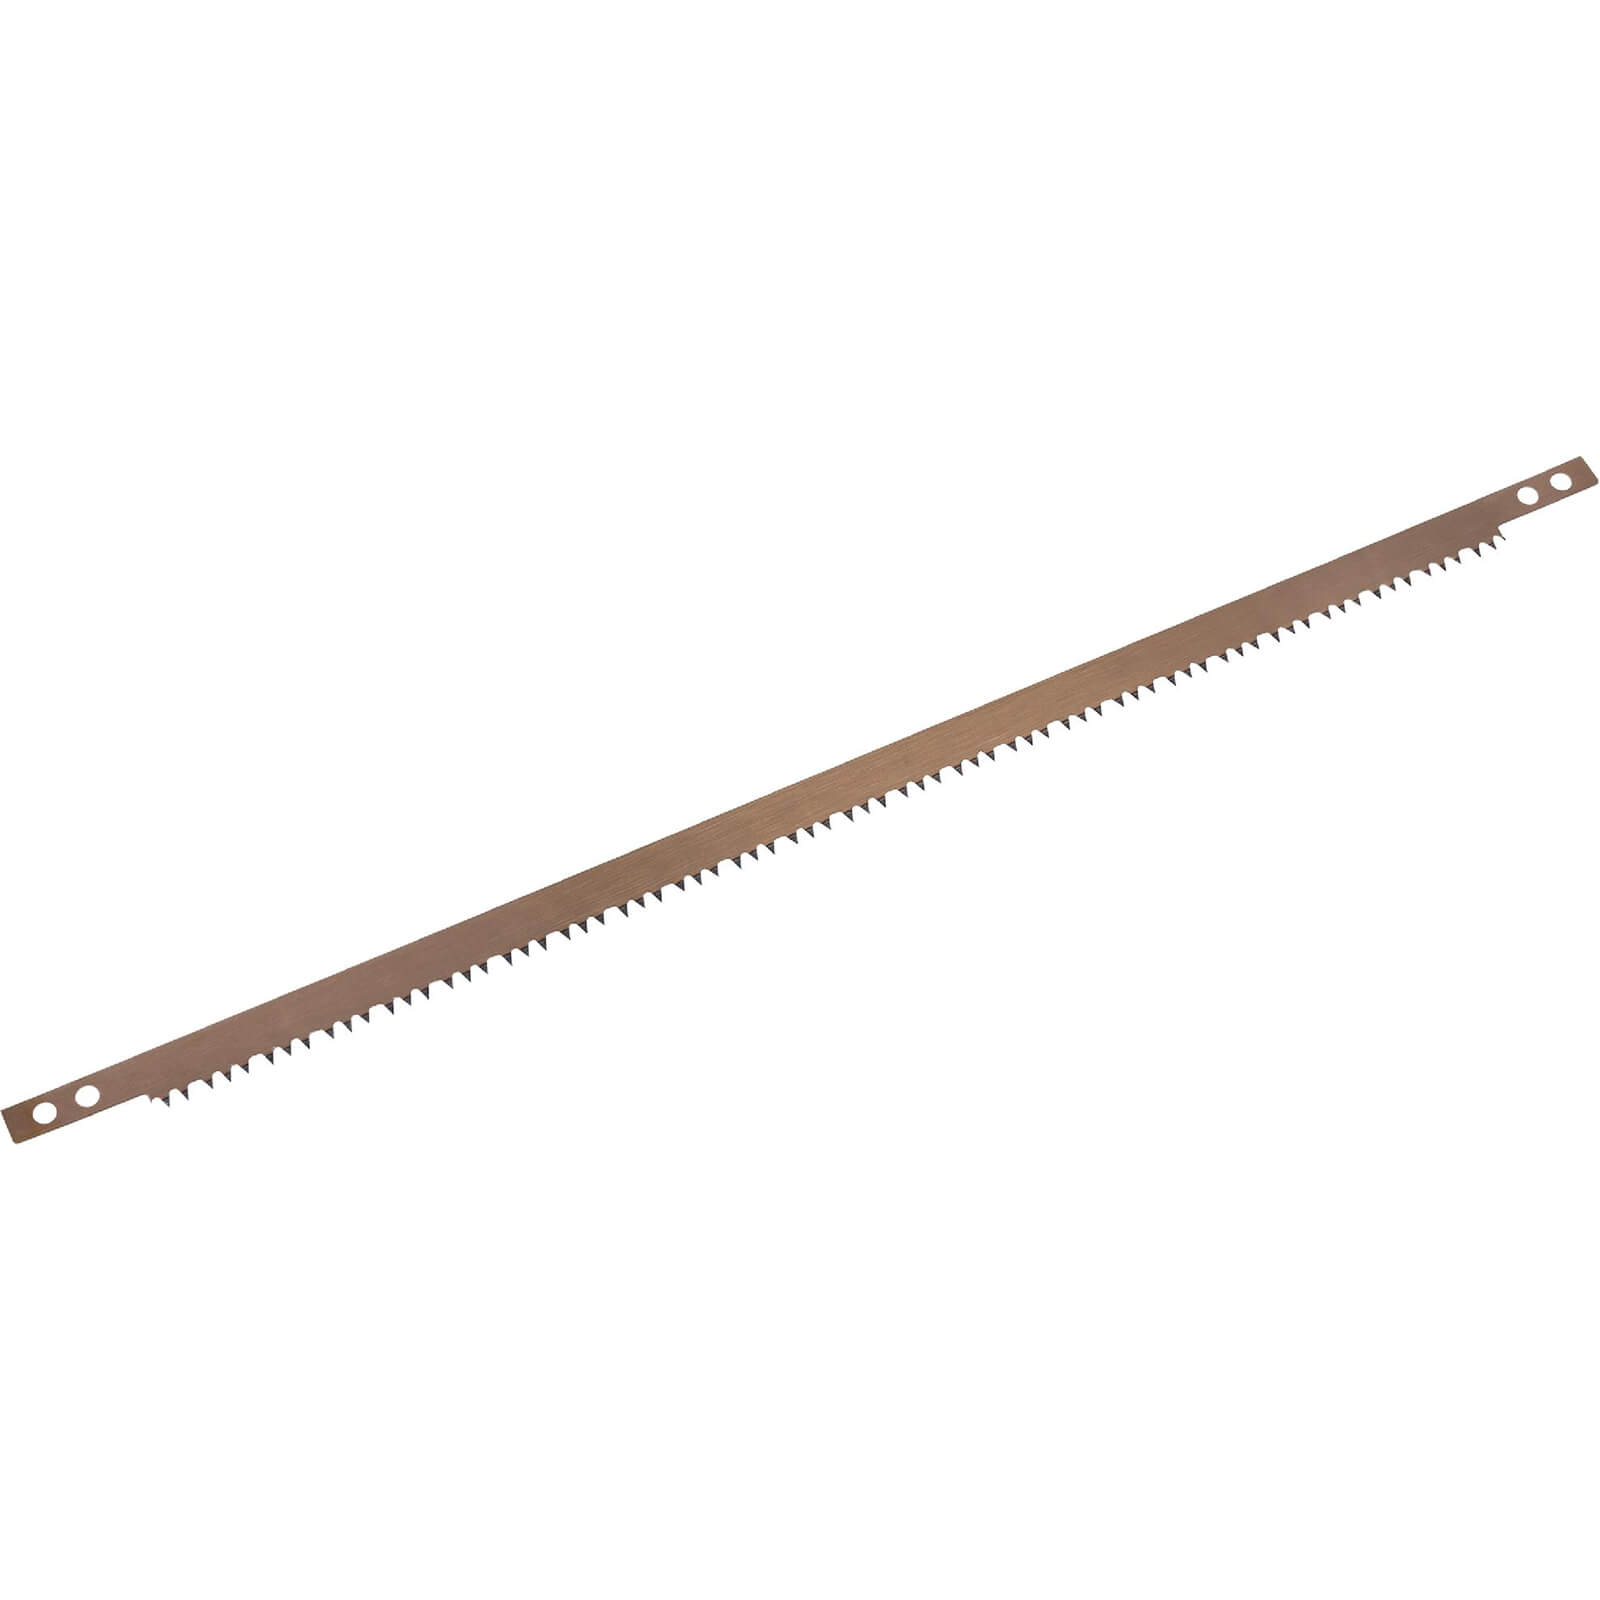 Photo of Roughneck Bow Saw Blade With Small Teeth 30